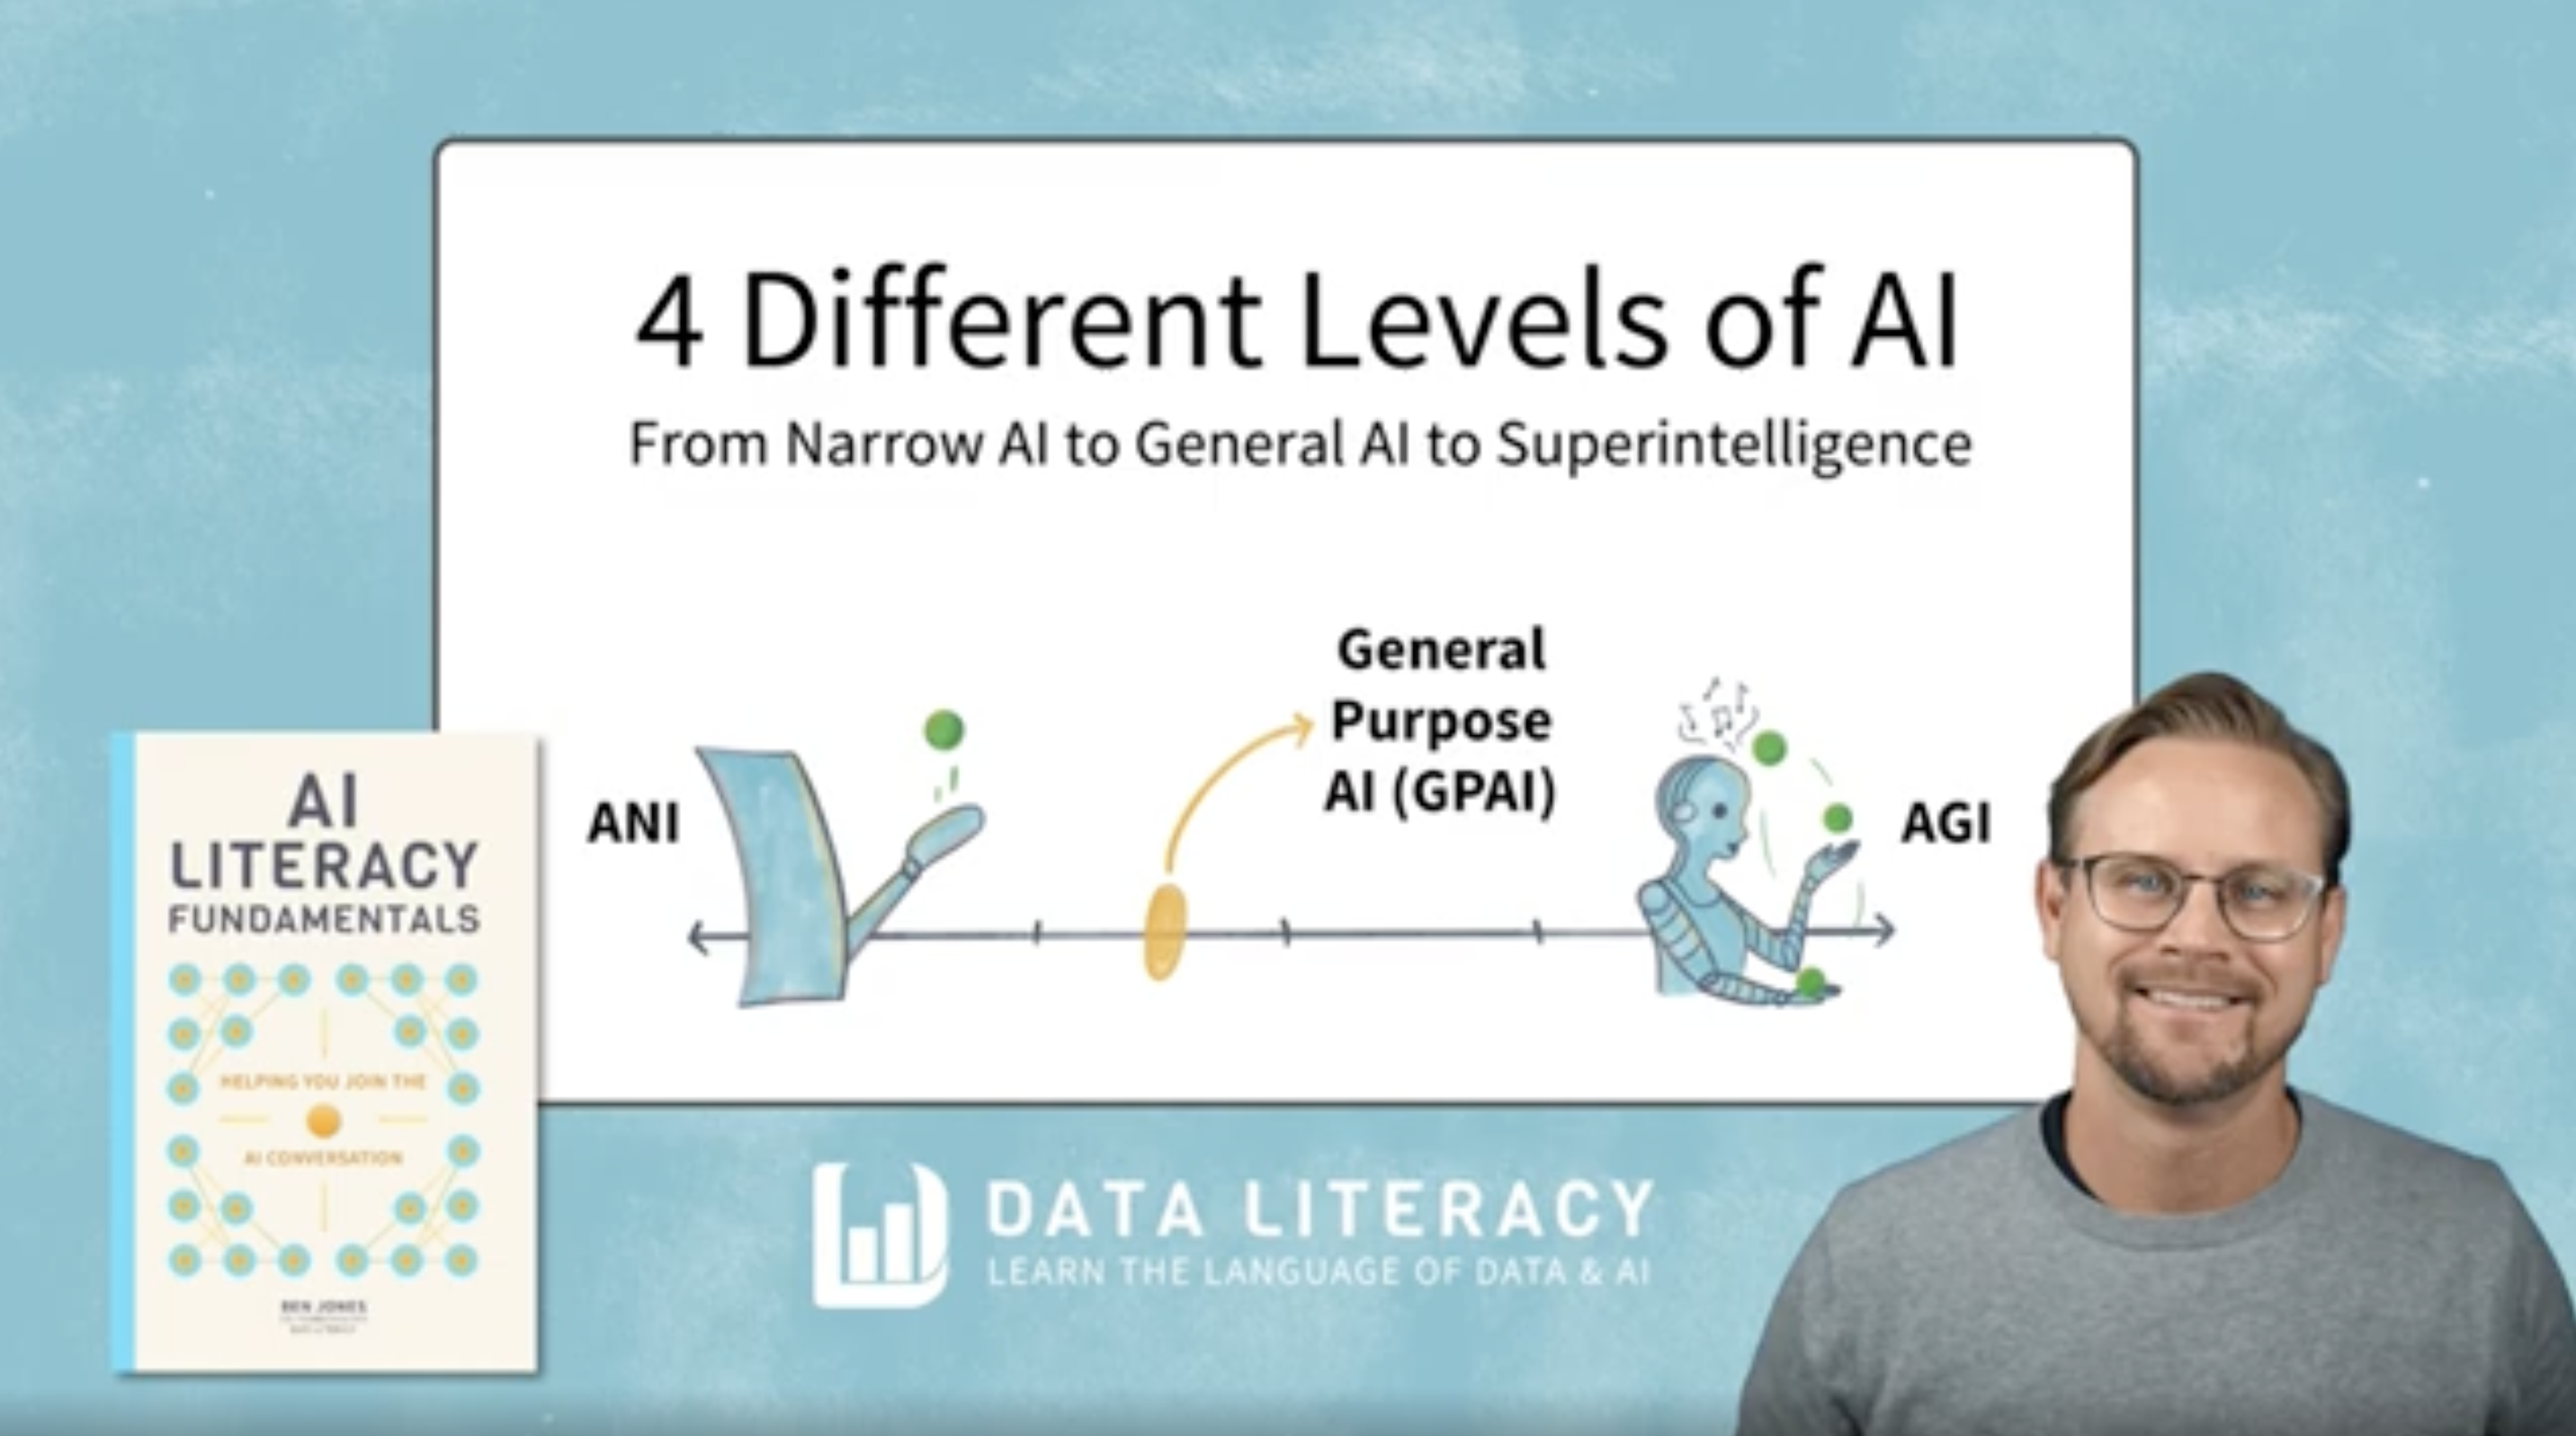 4 different levels of AI